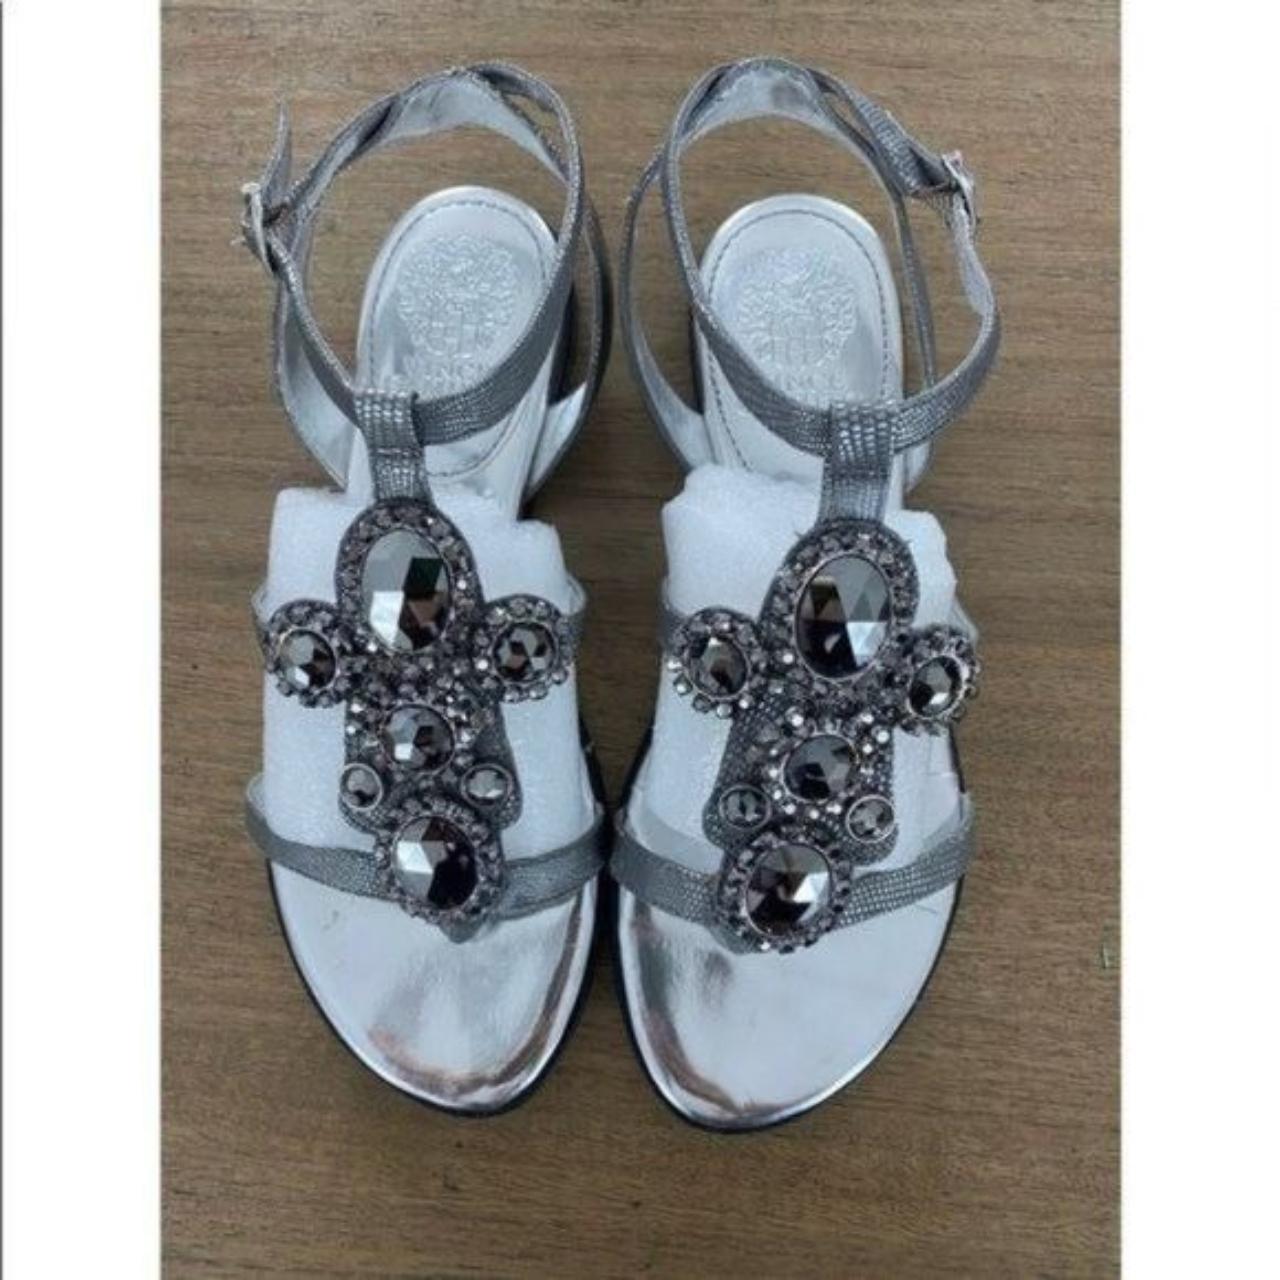 Vince Camuto Women's Silver Sandals